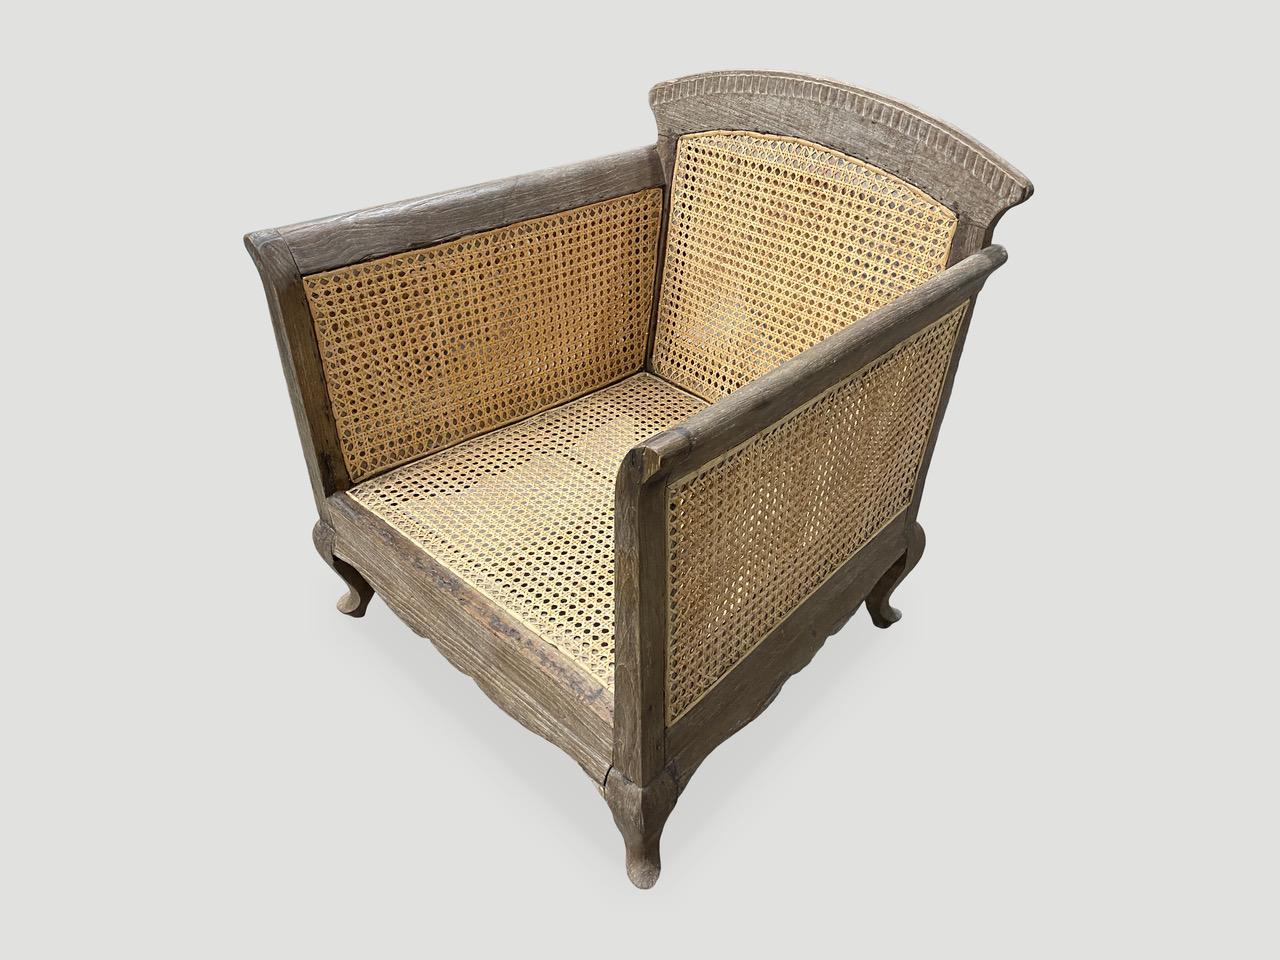 Beautiful antique Colonial chair. Hand-carved feet and restored double-backed hand-woven rattan. A classic chair for any space. Full dimensions; 28